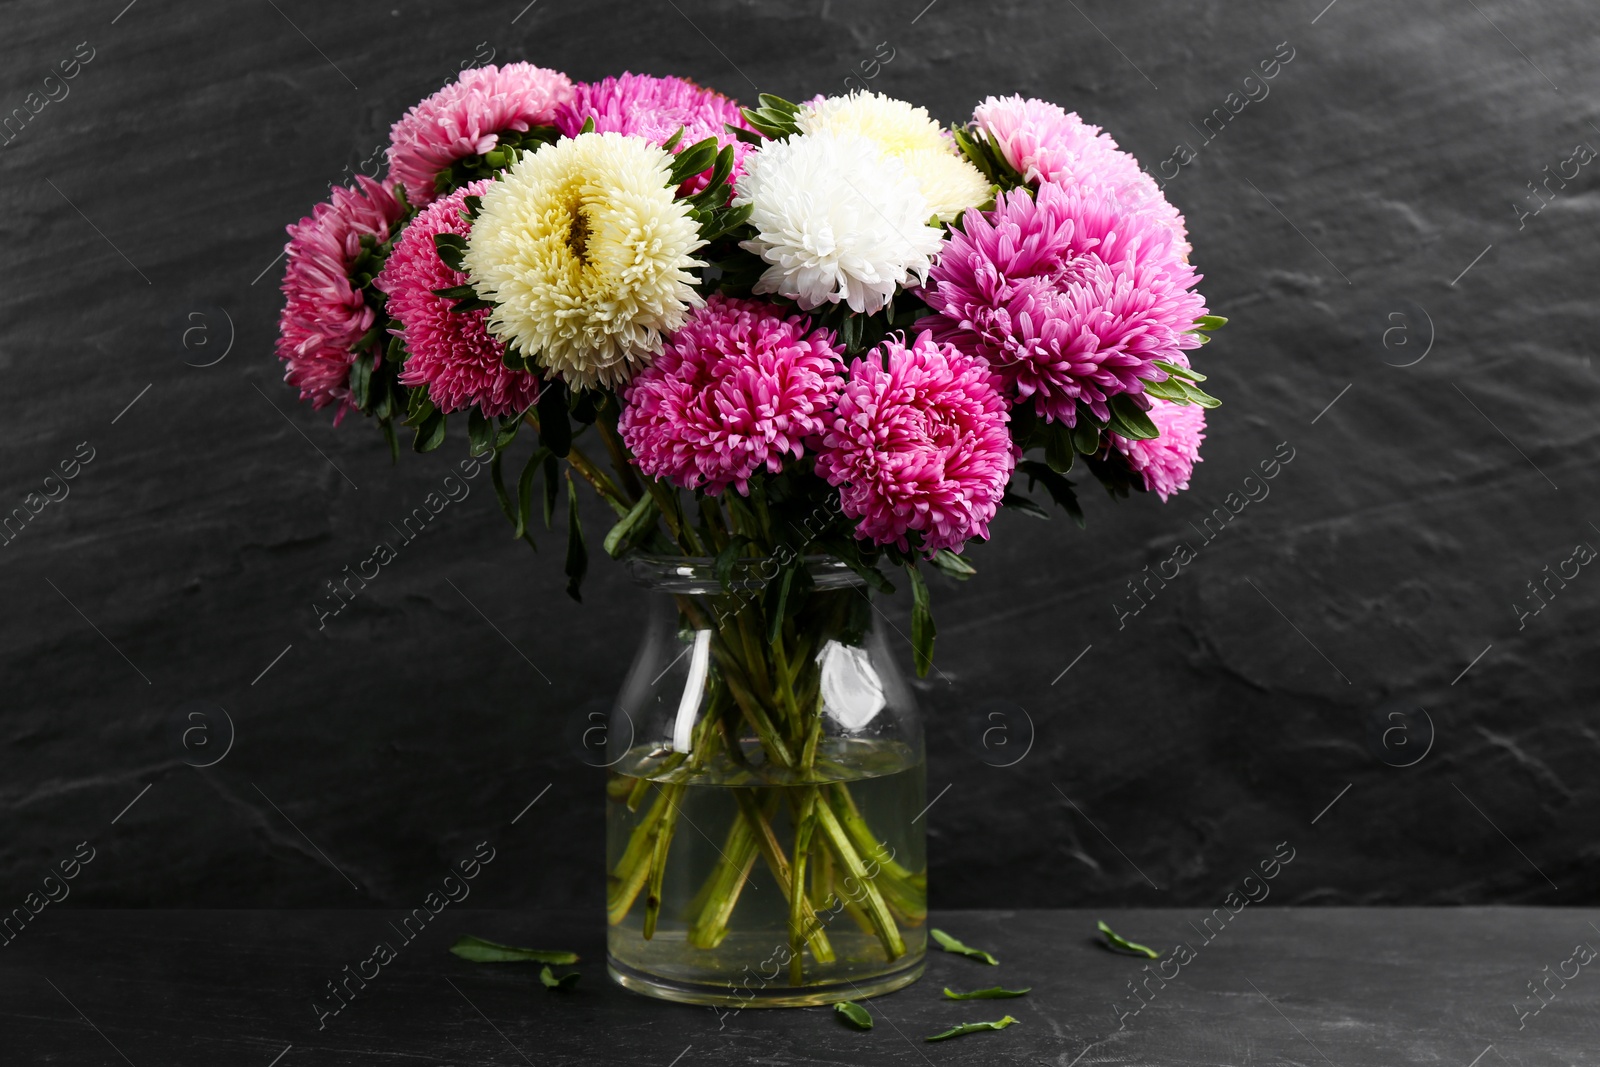 Photo of Beautiful asters in vase on table against black background. Autumn flowers